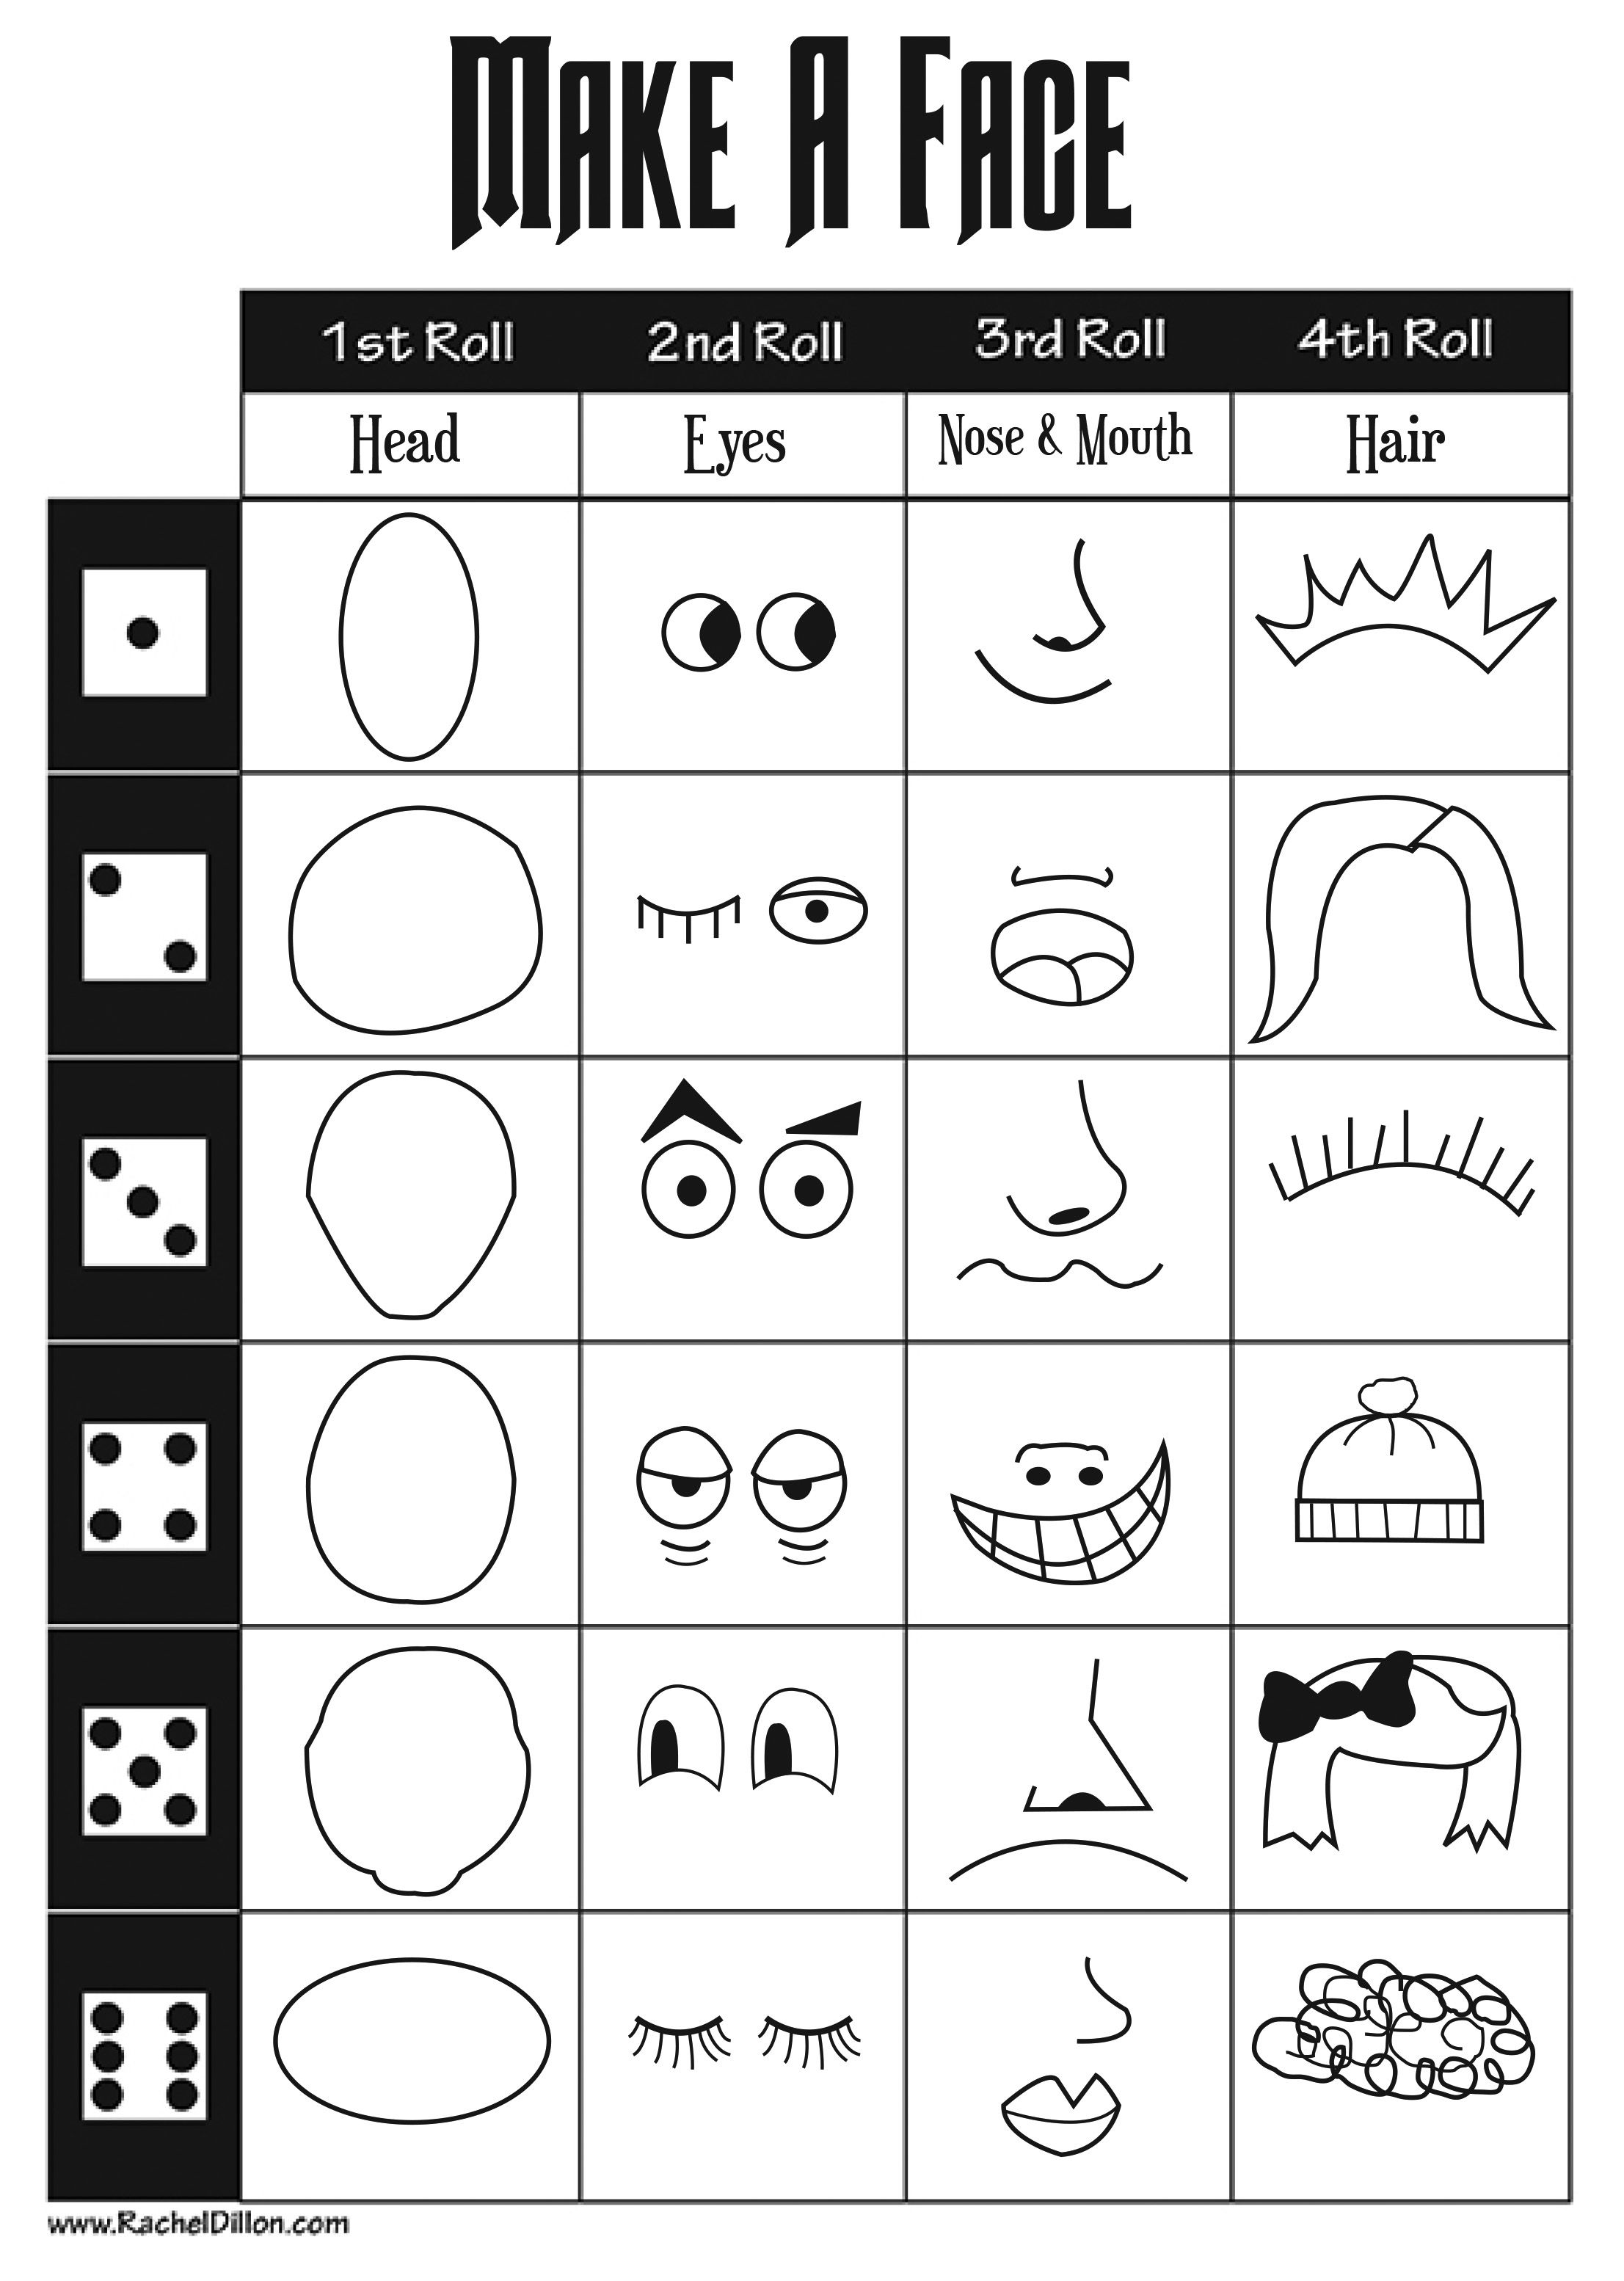 Make a Face Dice Game for kids to do. This is great to keep kids ...